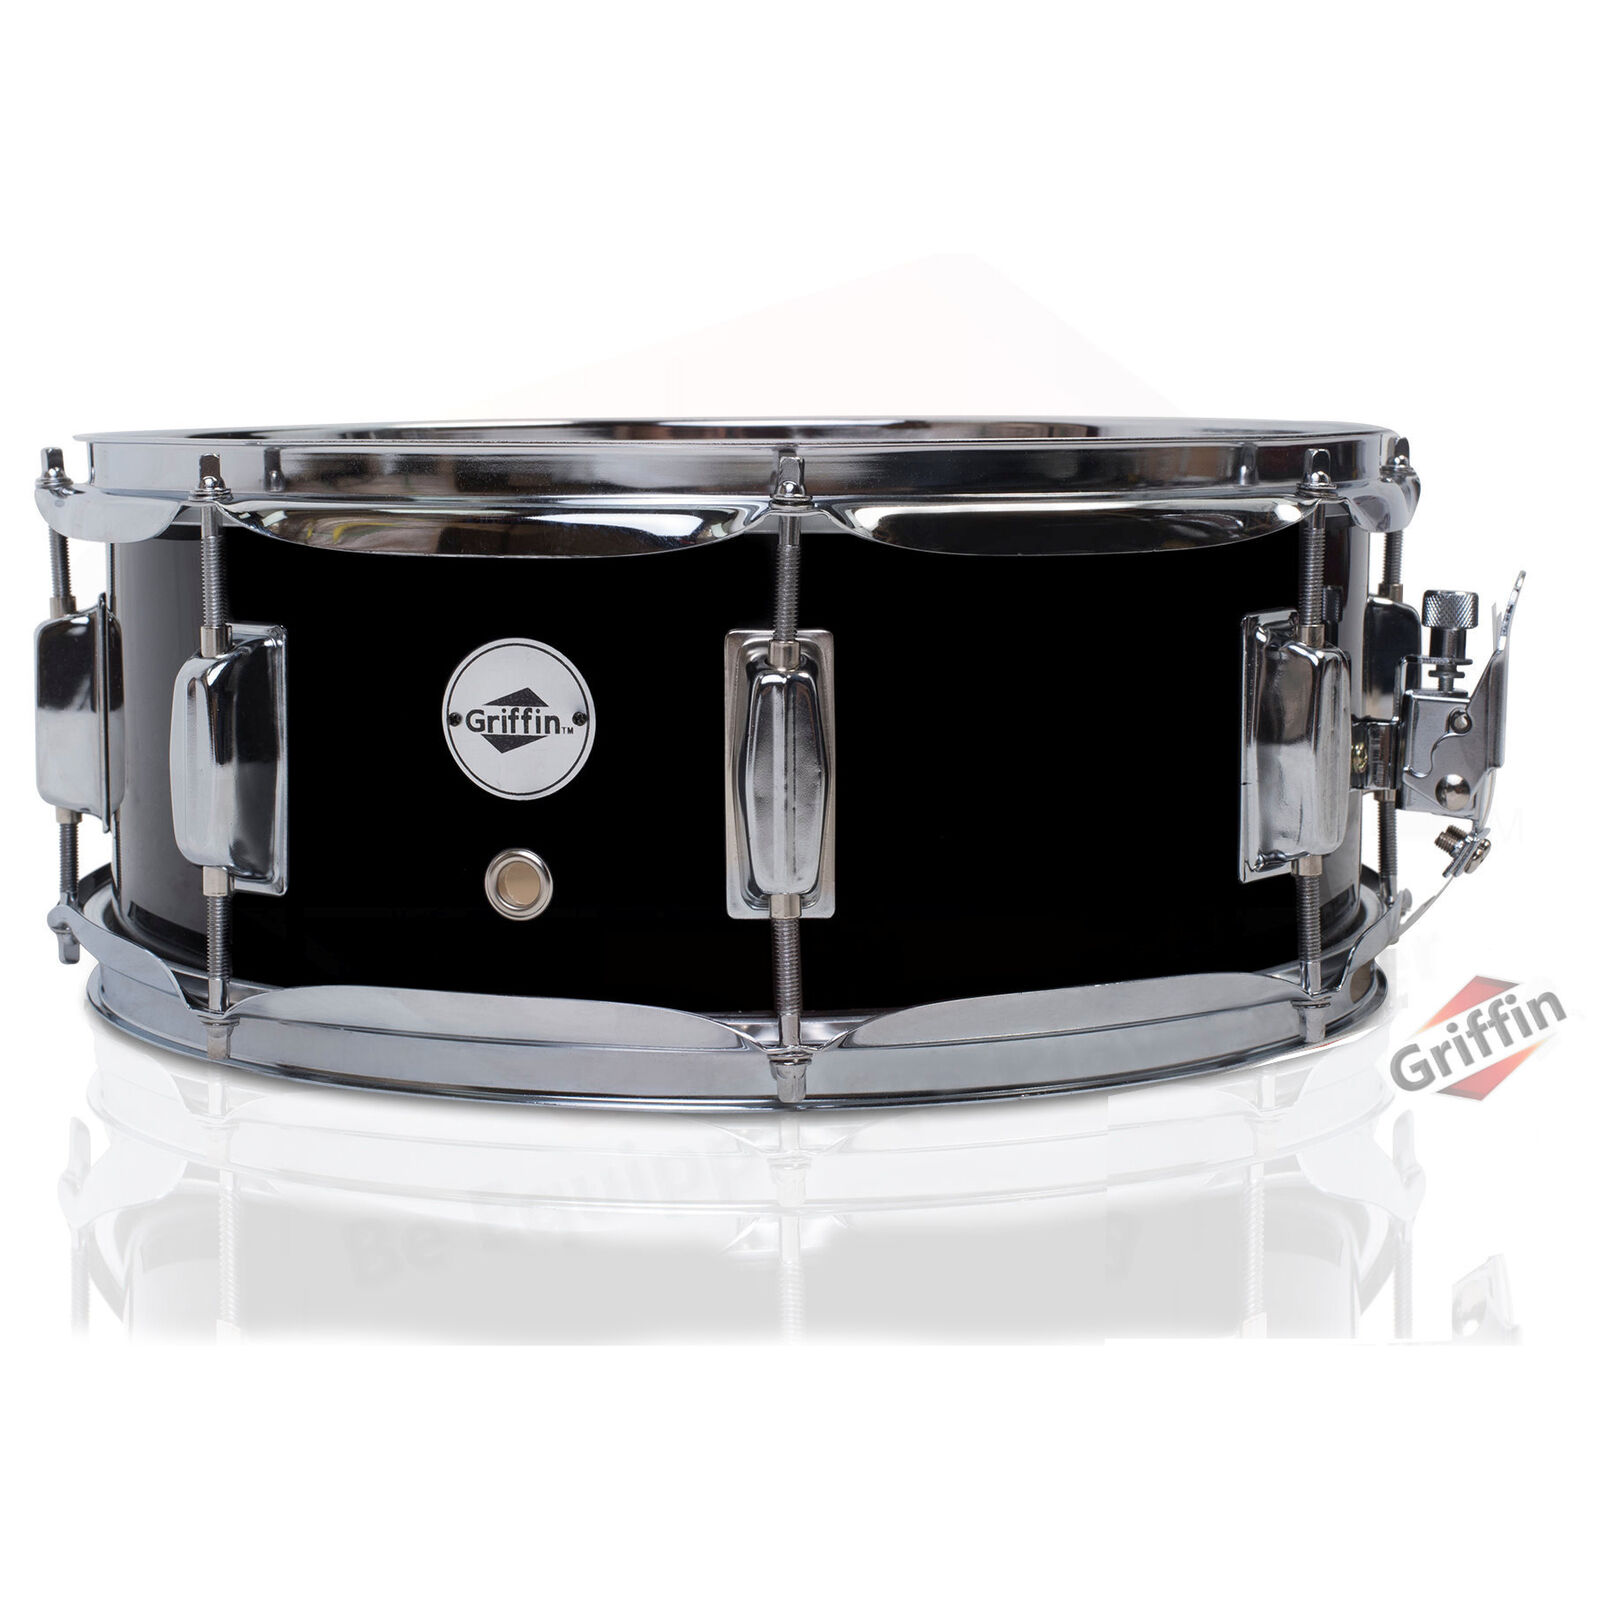 GRIFFIN Snare Drum - Black 14"x5.5 Poplar Wood Shell Acoustic Percussion Kit Set